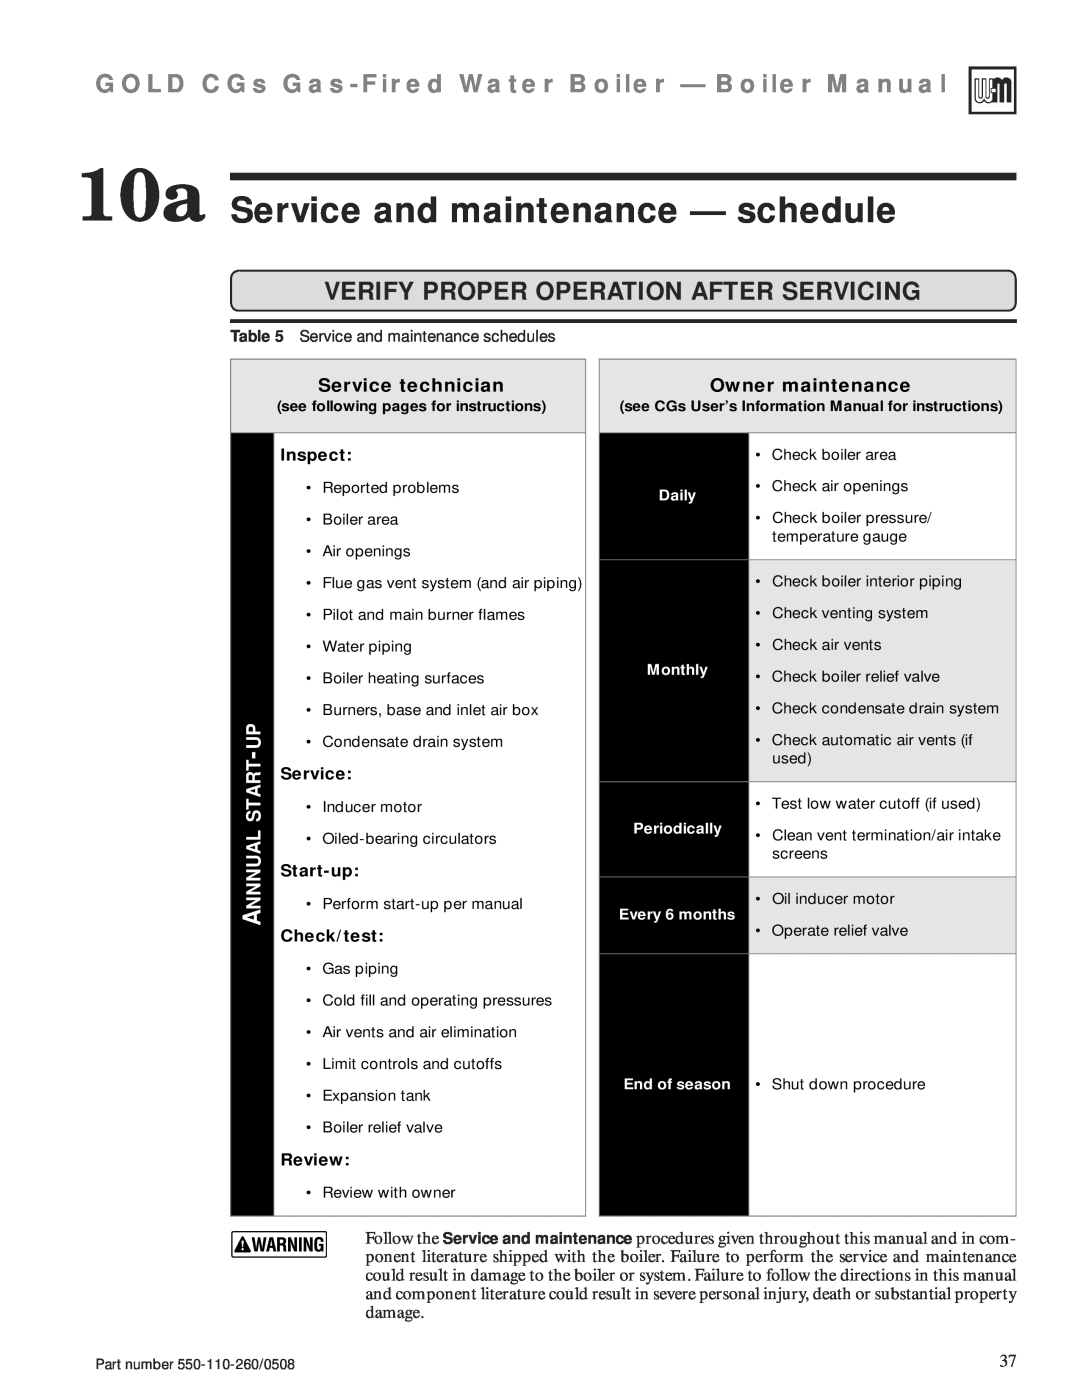 Weil-McLain 550-110-260/0508 manual 10a Service and maintenance — schedule, Verify Proper Operation After Servicing, Daily 